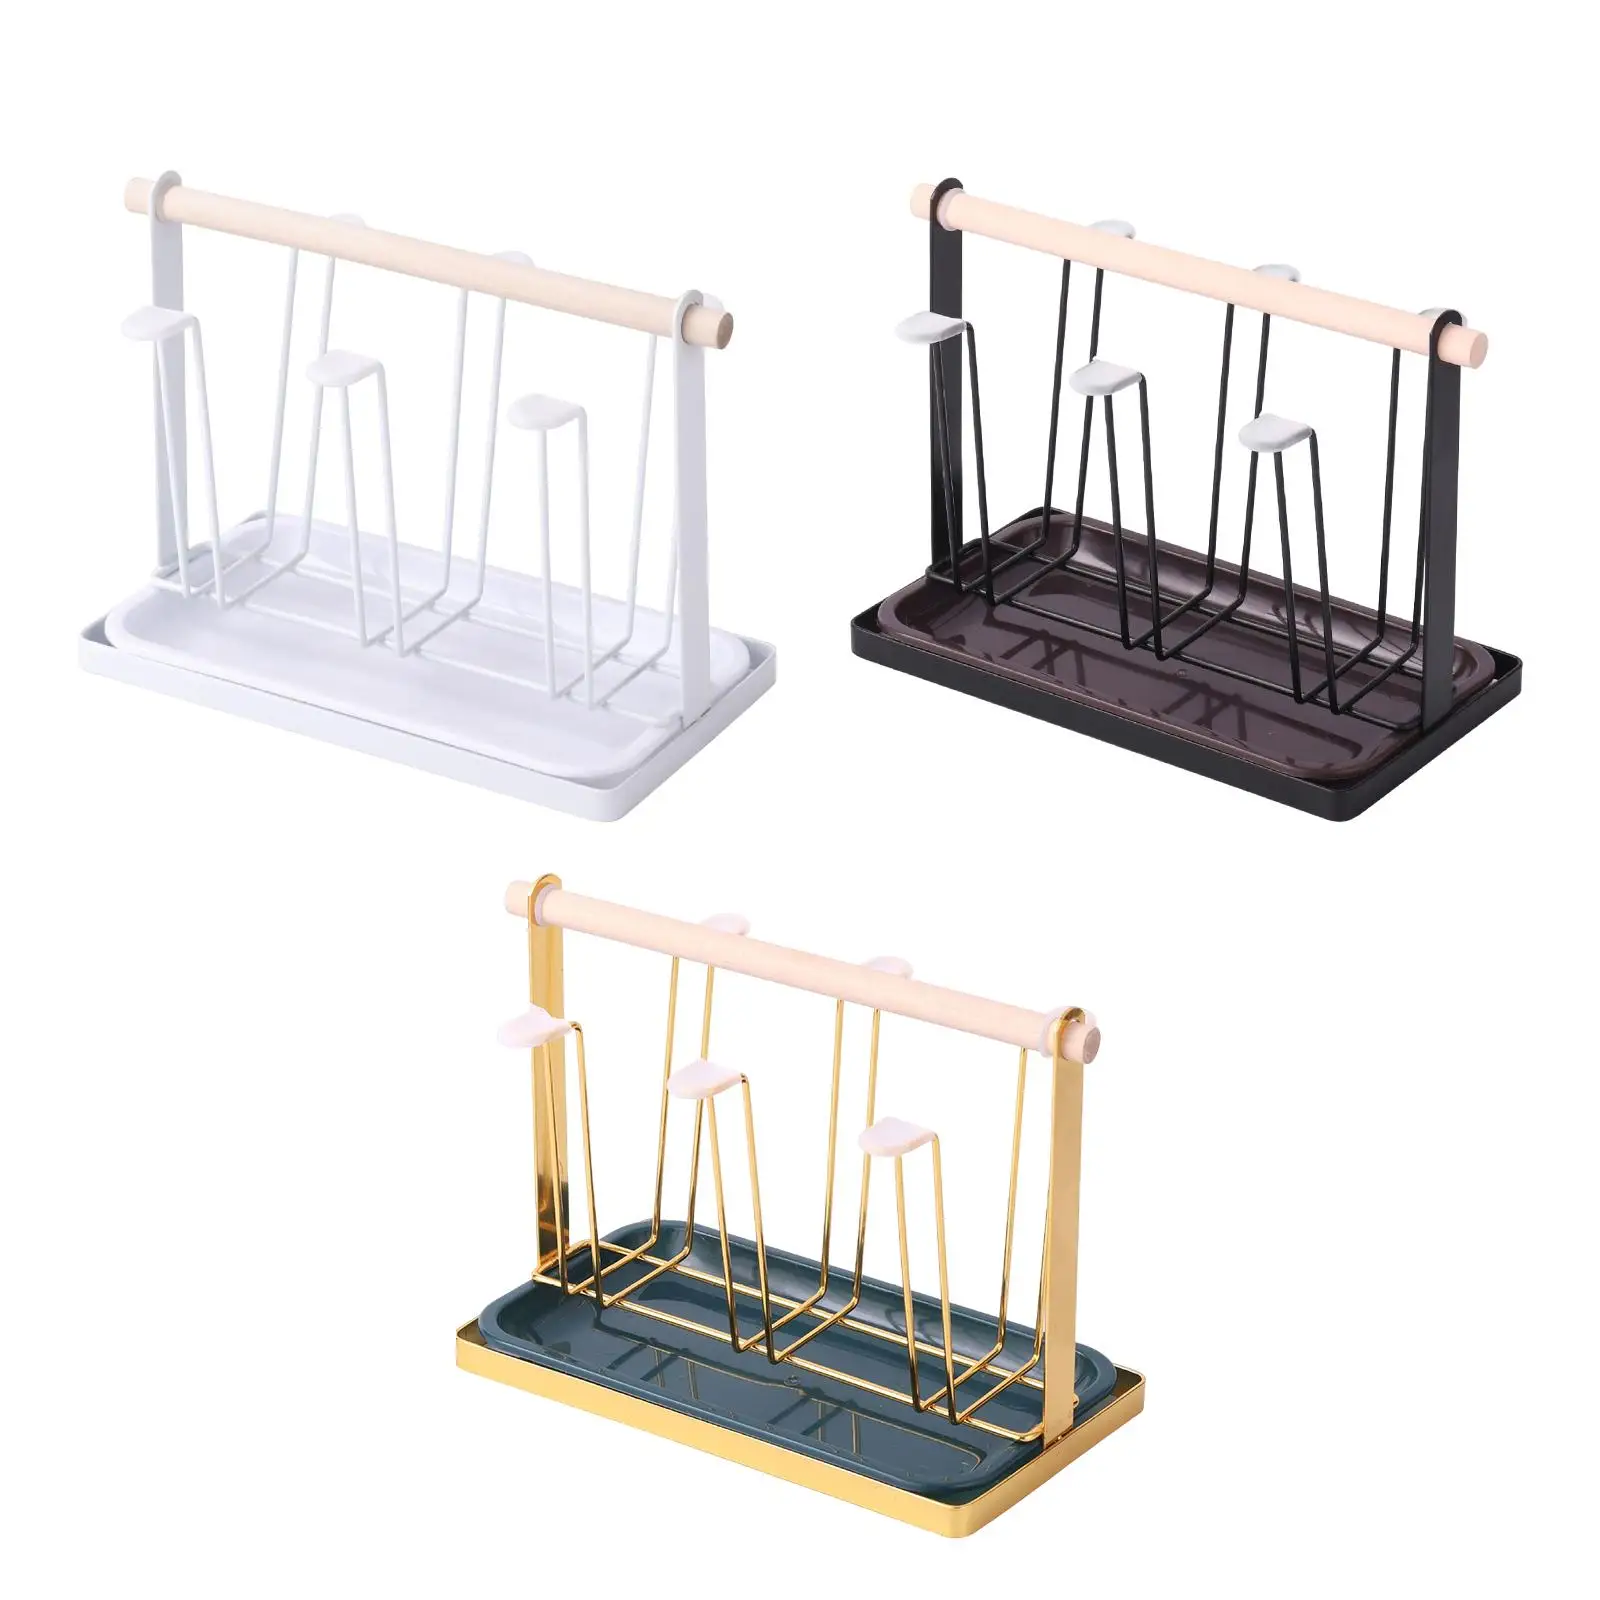 Luxury Iron Mug Holder Cup Rack 6 Cup Holder Hanger with Tray Glass Cup Stand Tea Cup Storage Shelf for Glasses Mugs Countertop